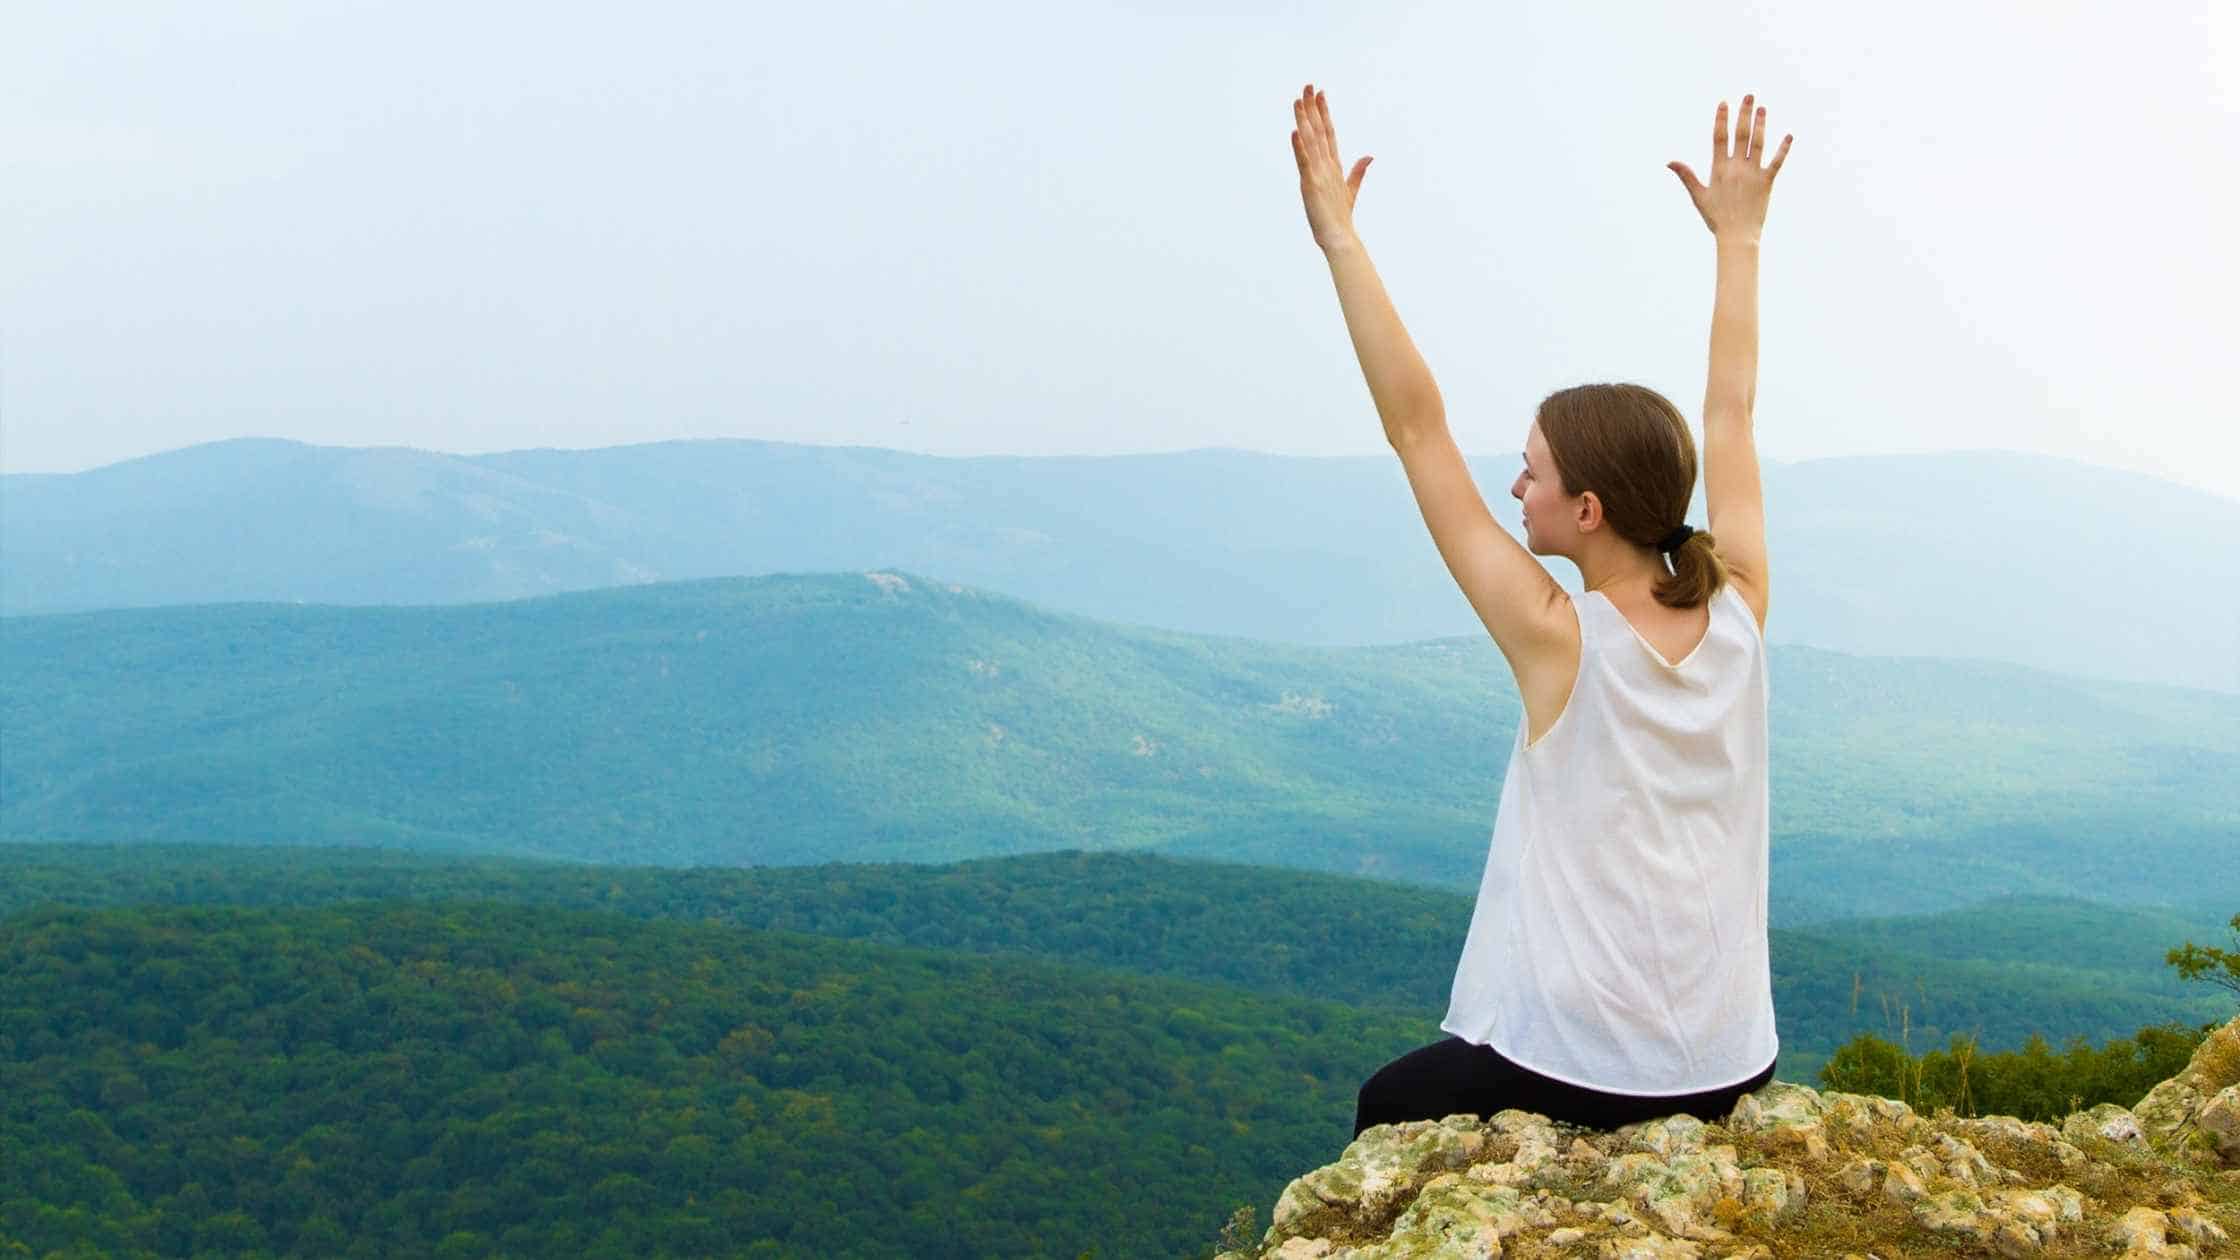 Picture of woman sitting on the edge of a mountain with her arms raised and looking away into the mountains